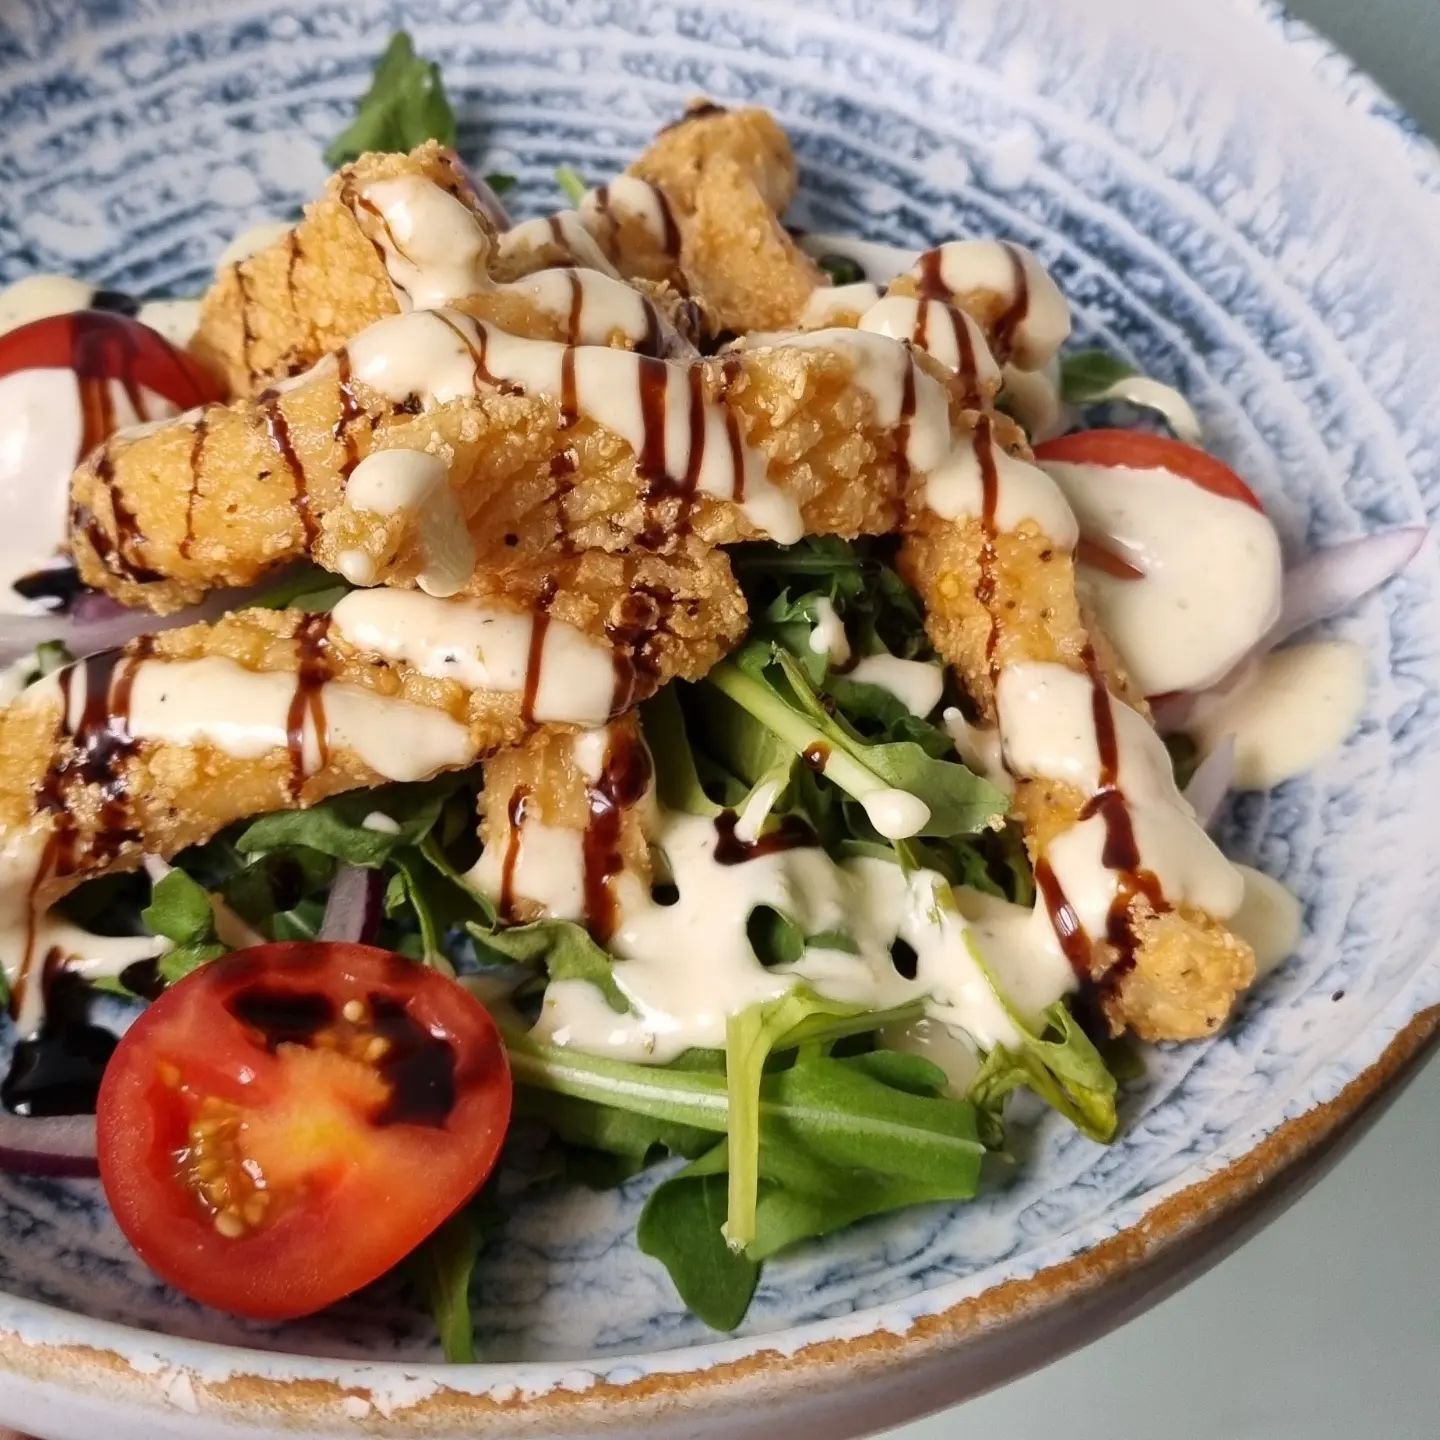 Looking for a light lunch? We've got you covered! Come in and enjoy a delicious perfect-for-lunch sized salt &amp; pepper squid salad with us. 🤤

This remains one of our most popular dishes and when you buy one between 12-5pm you also get a FREE hou